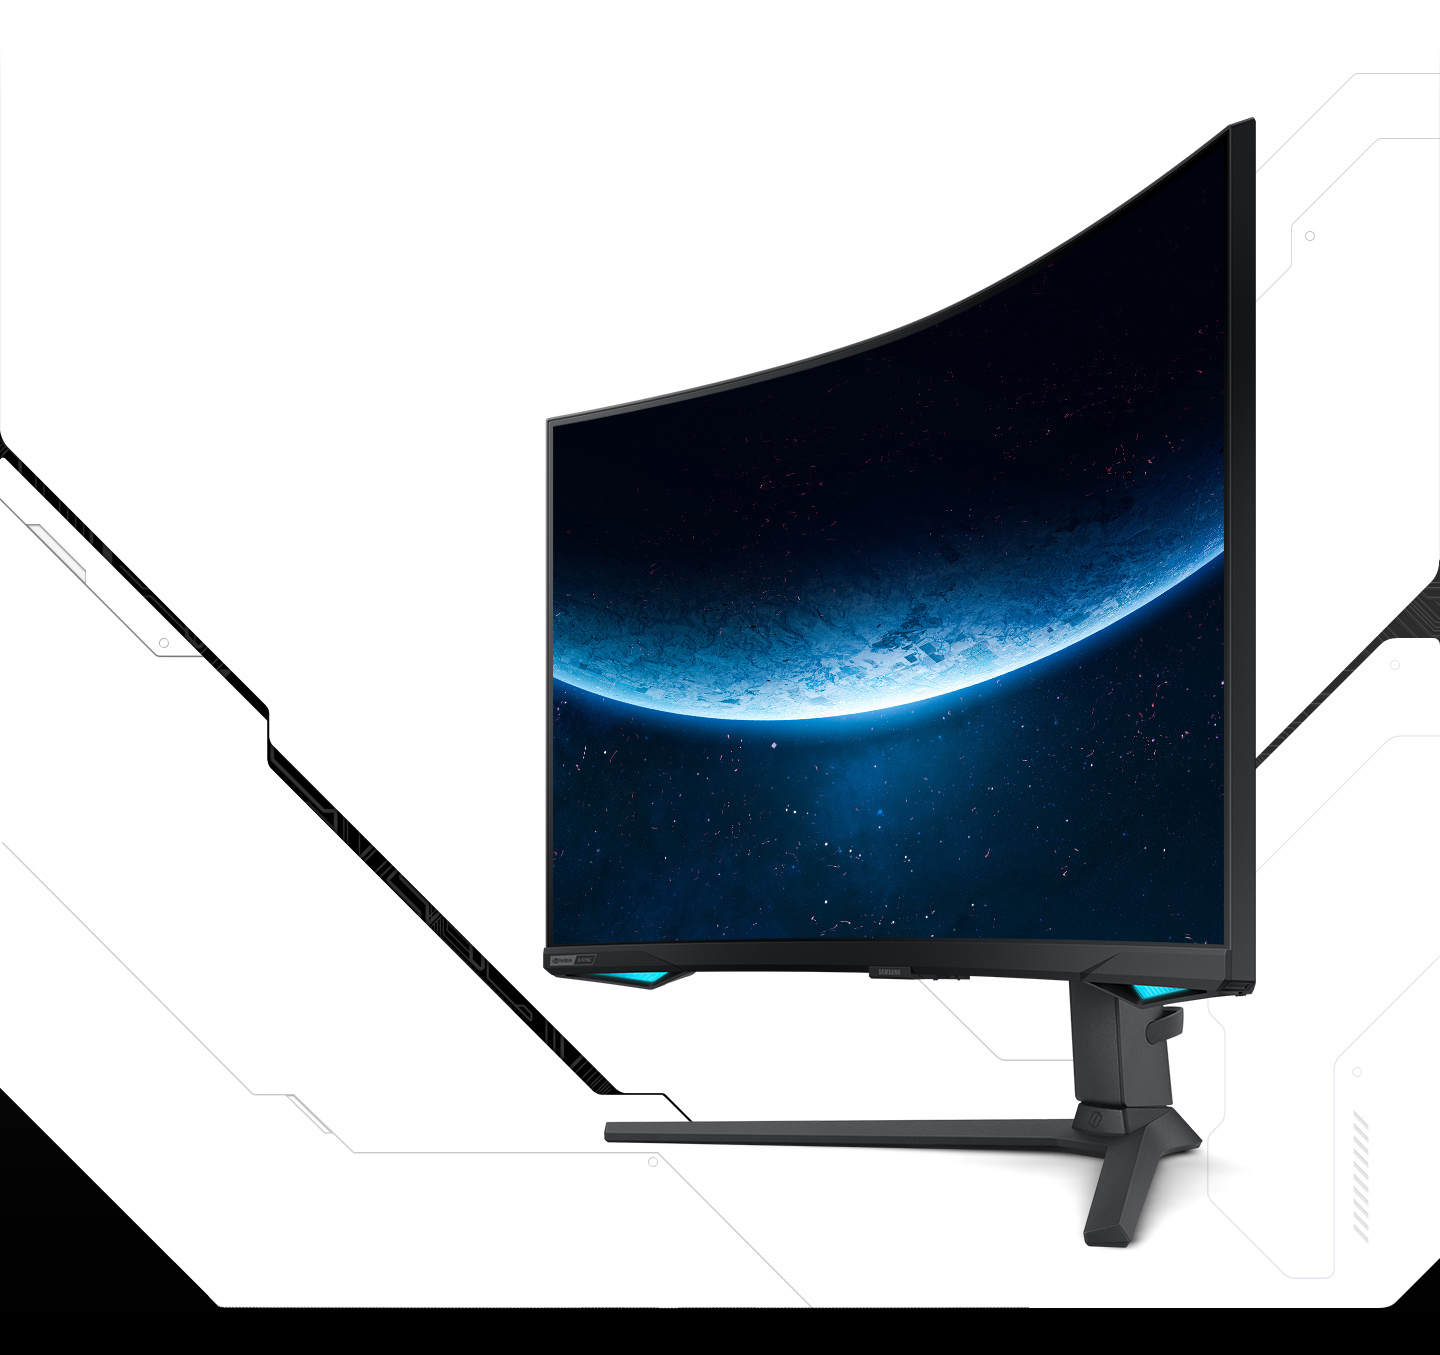 SAMSUNG 32 Odyssey Neo G7 4K UHD 165Hz 1ms G-Sync 1000R Curved Gaming  Monitor, Quantum HDR2000, AMD FreeSync Premium Pro, Ultrawide Game View